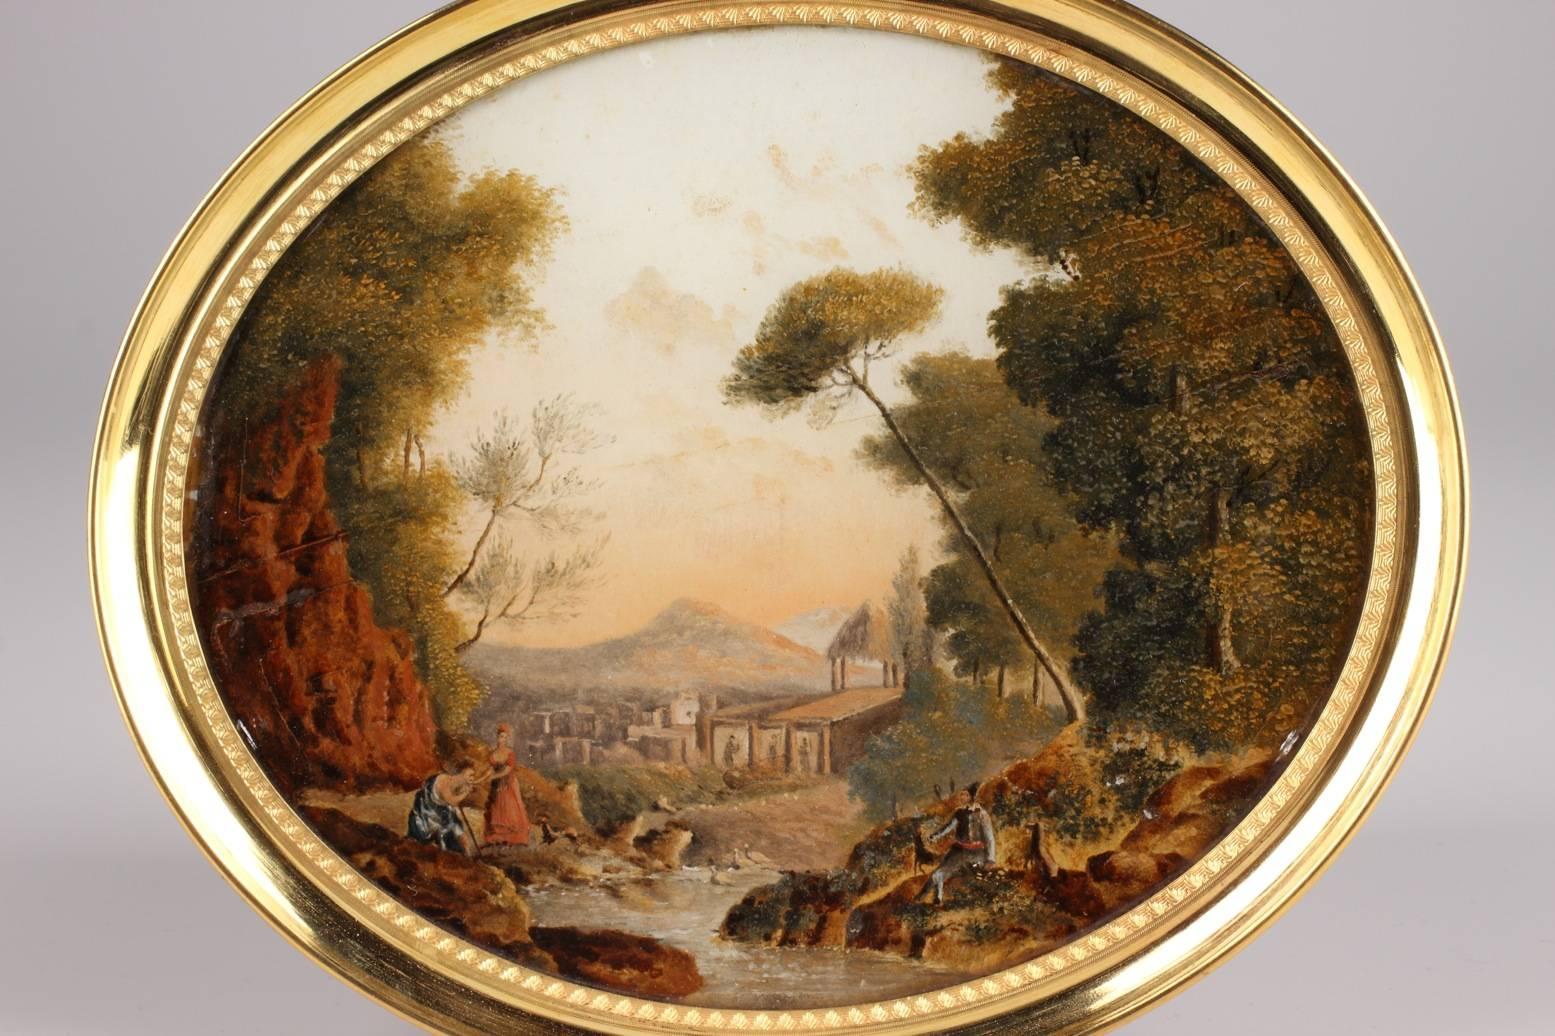 Oval reverse glass painting depicting a pastoral idyll in a forest, near a river, in the taste of Jean-Baptiste Huet. To the left of the picture, a shepherd in a toga is kneeling in front of a young woman and kissing her hand. She is wearing an